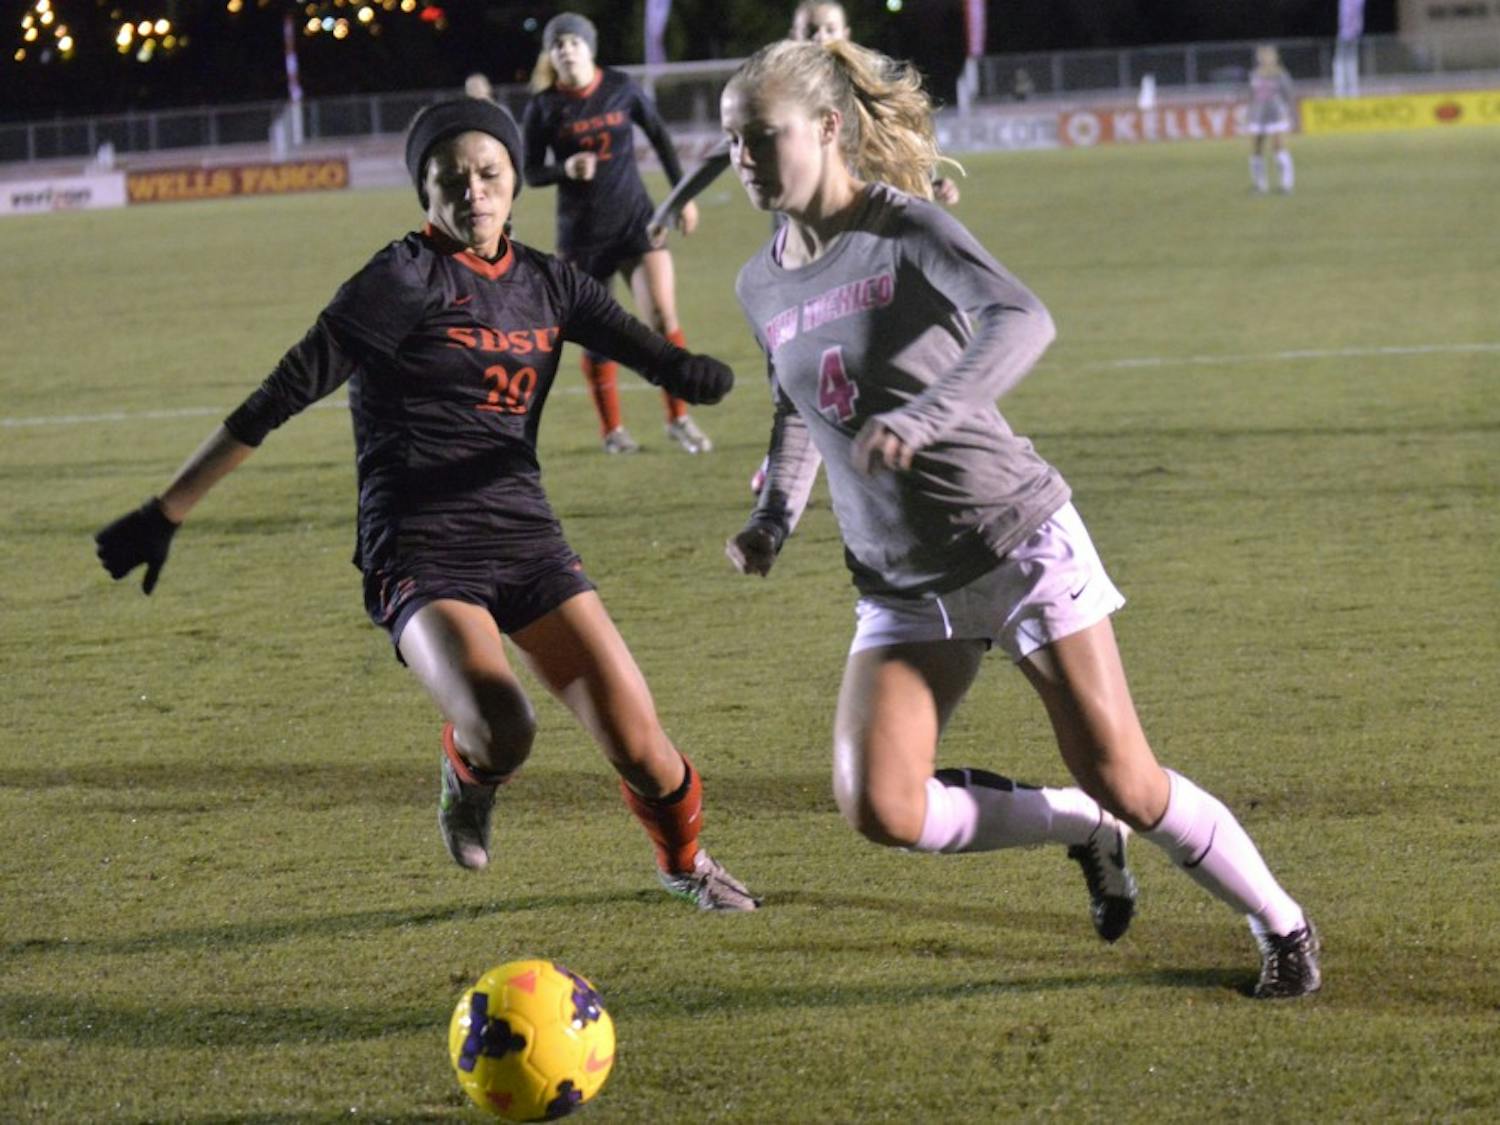 Senior midfielder/forward Lindsey Guice makes a move past a San Diego player at the UNM Soccer Complex Oct. 30.&nbsp;The Lobos lost to San Jose in penalty kicks after a 1-1 tie.&nbsp;